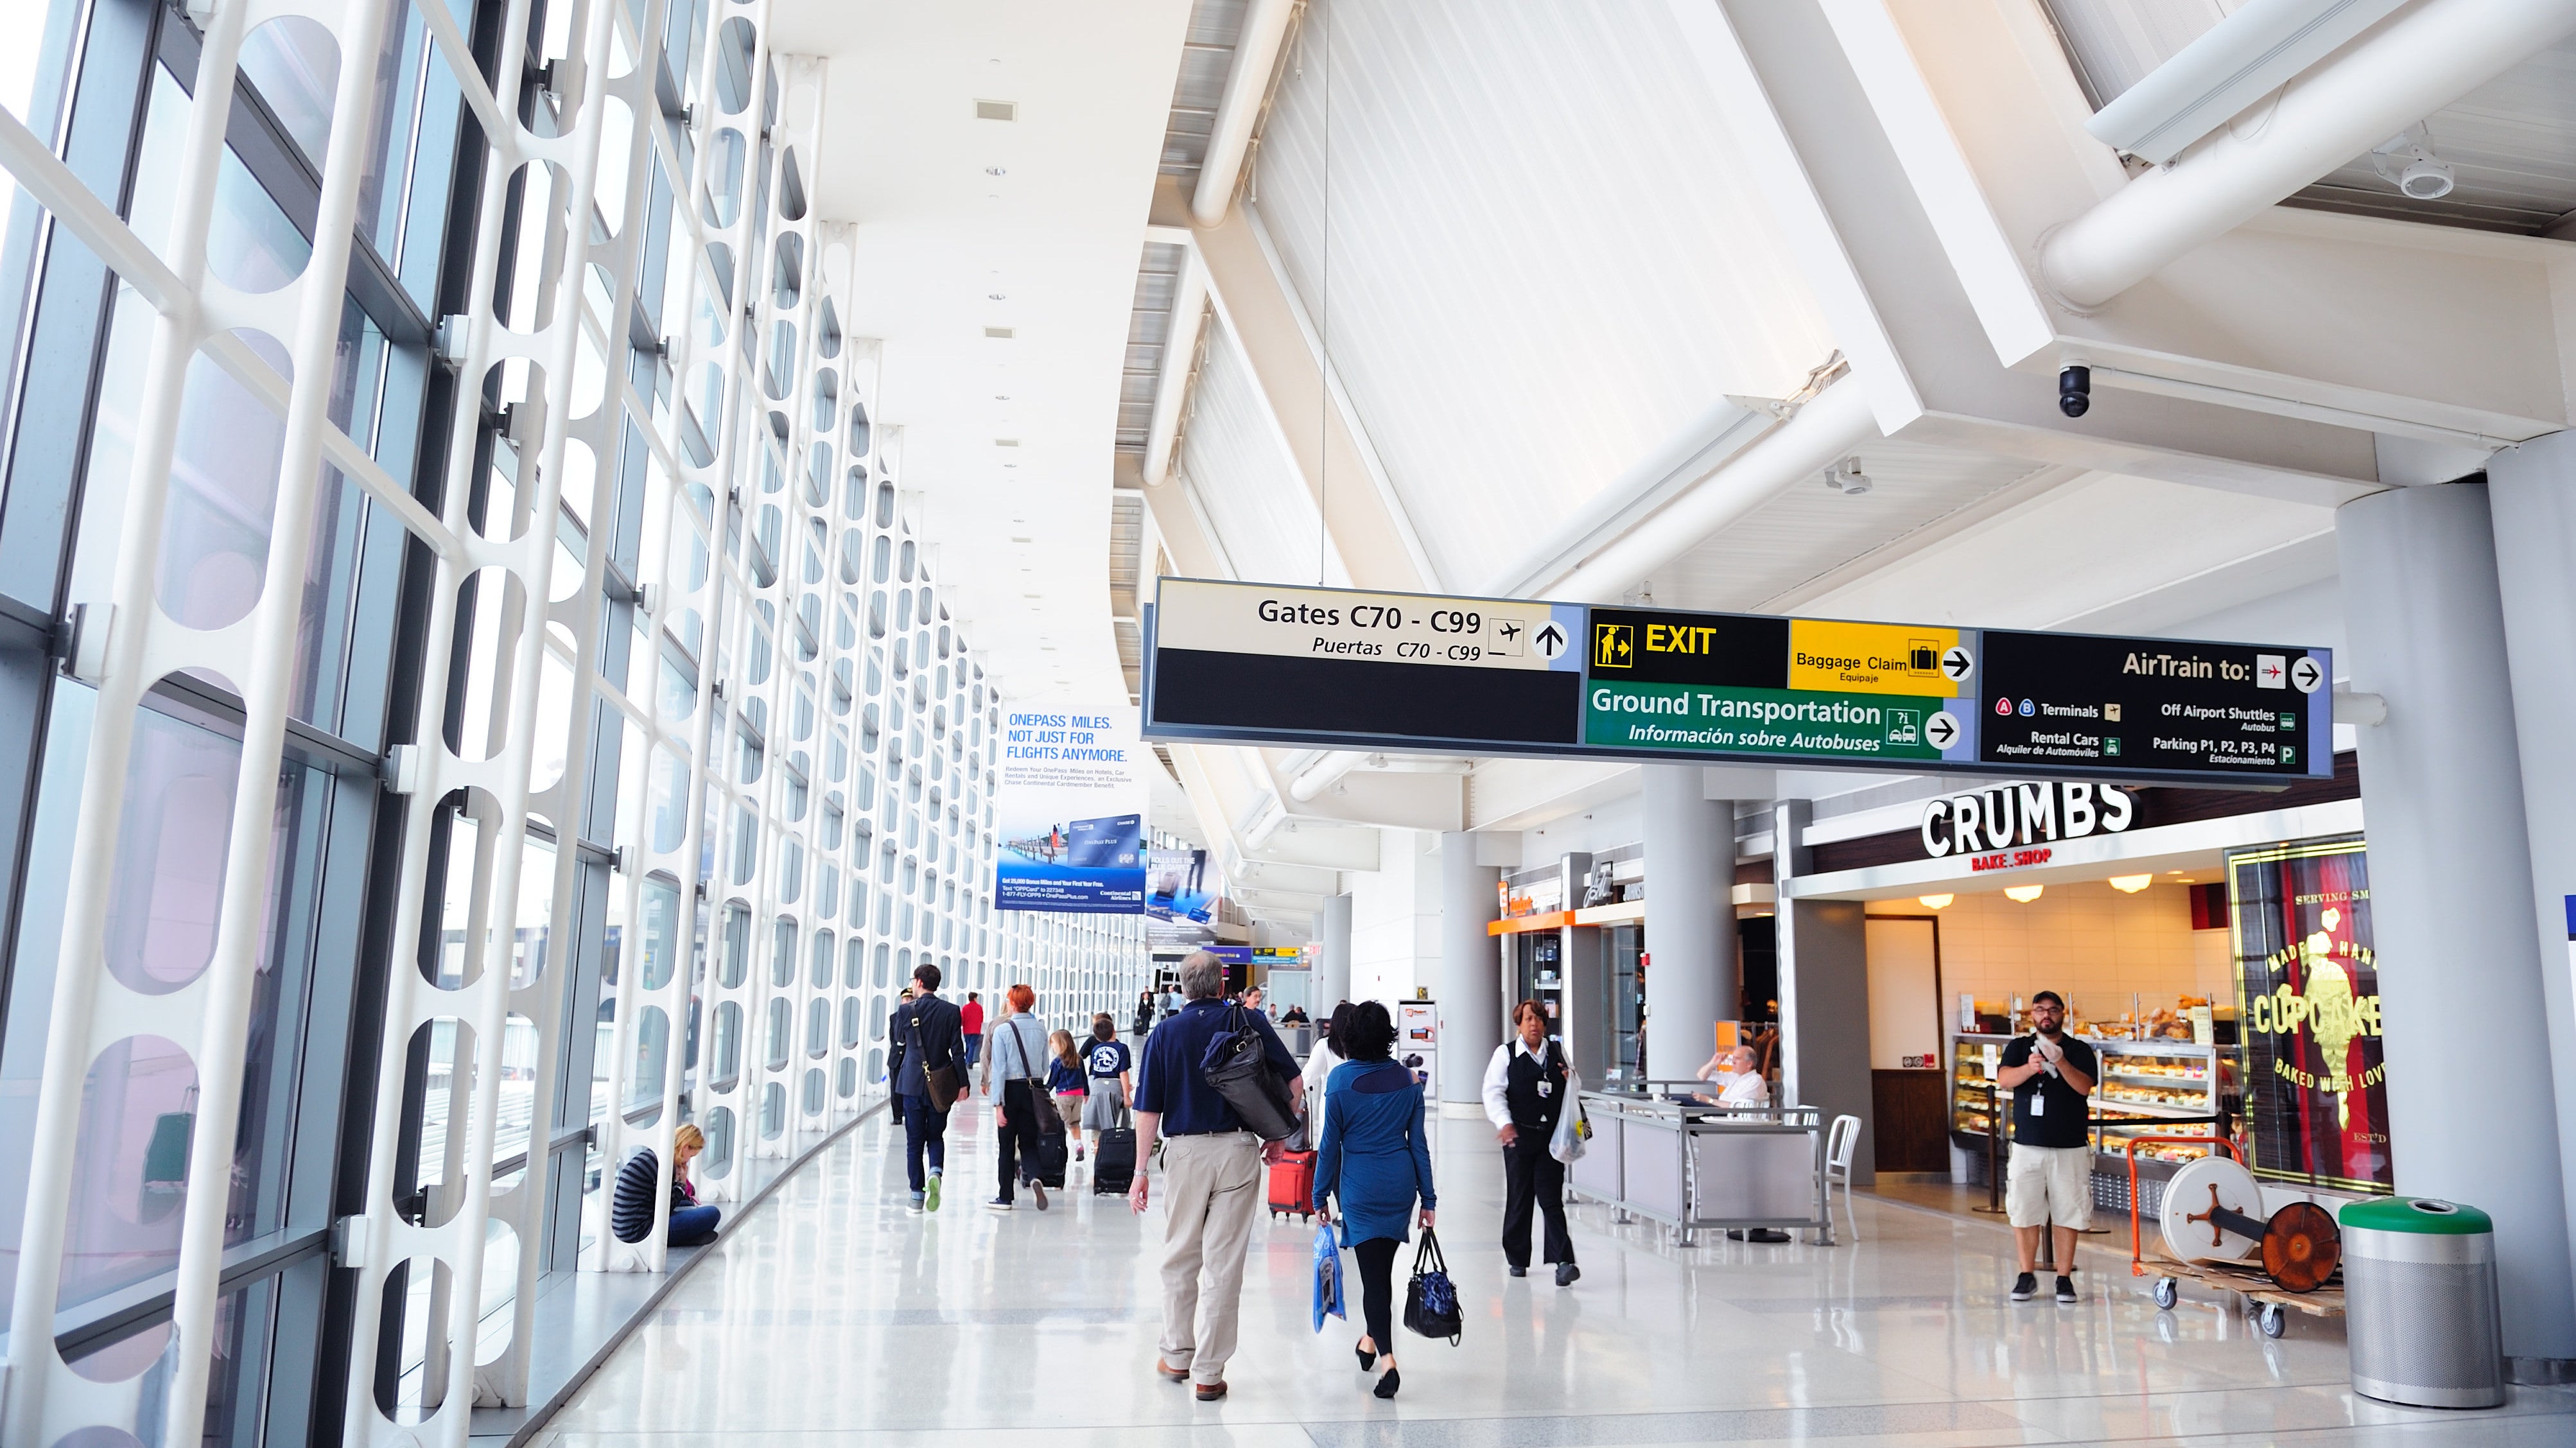 These Are The Most Expensive Airports In The U.S.